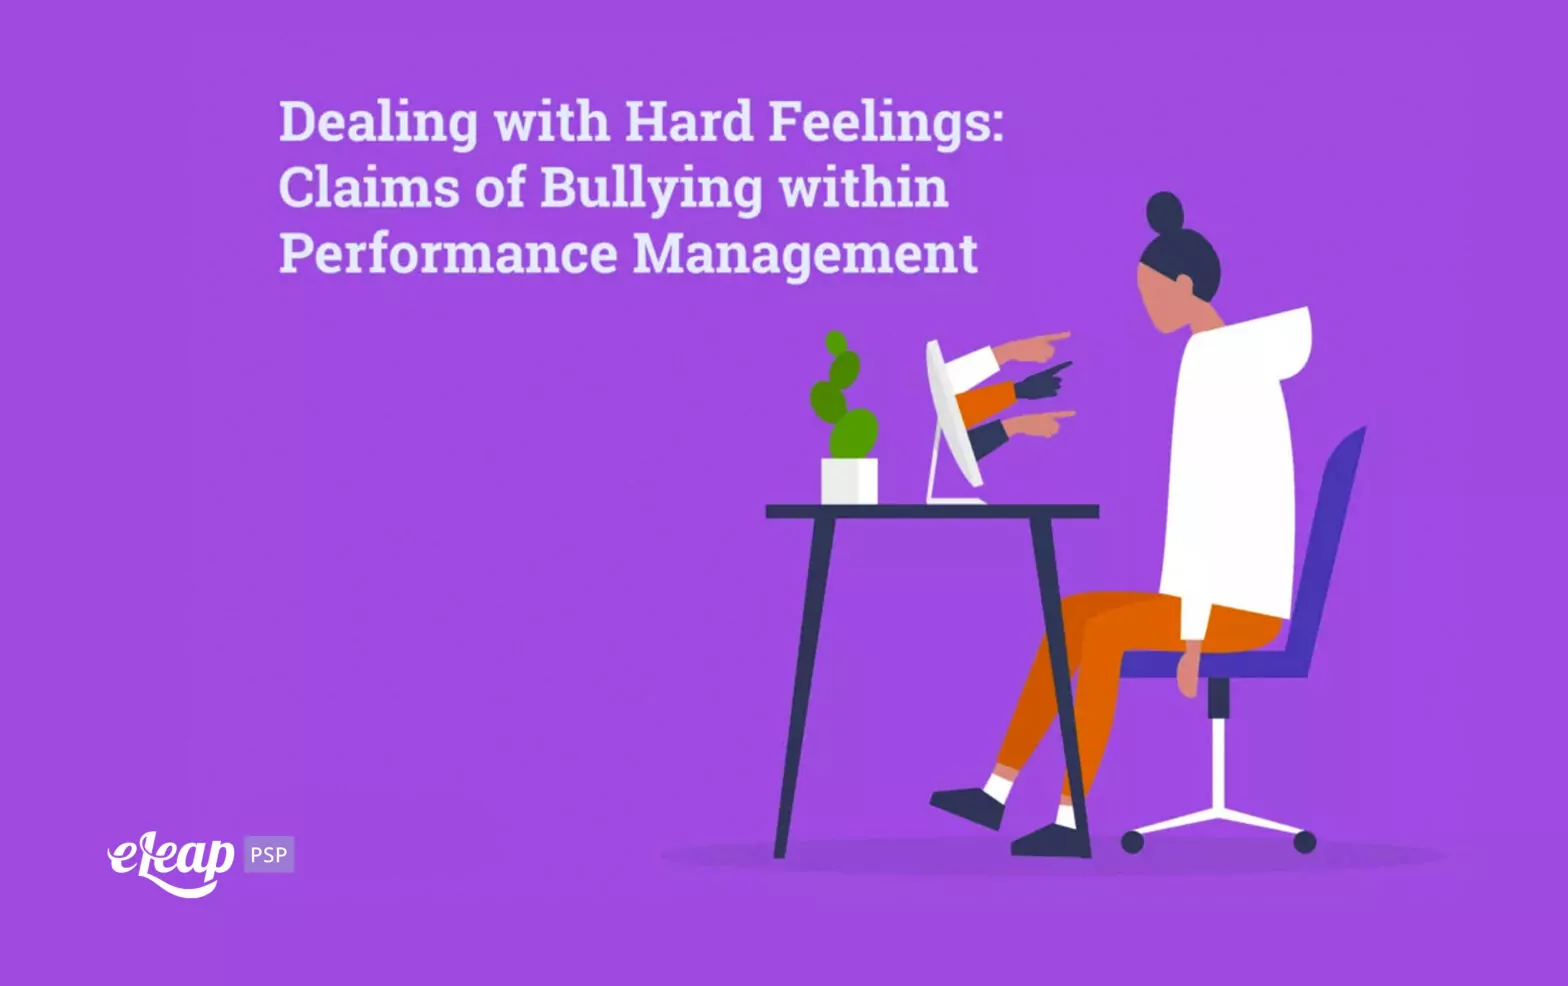 Dealing with Hard Feelings: Claims of Bullying within Performance Management